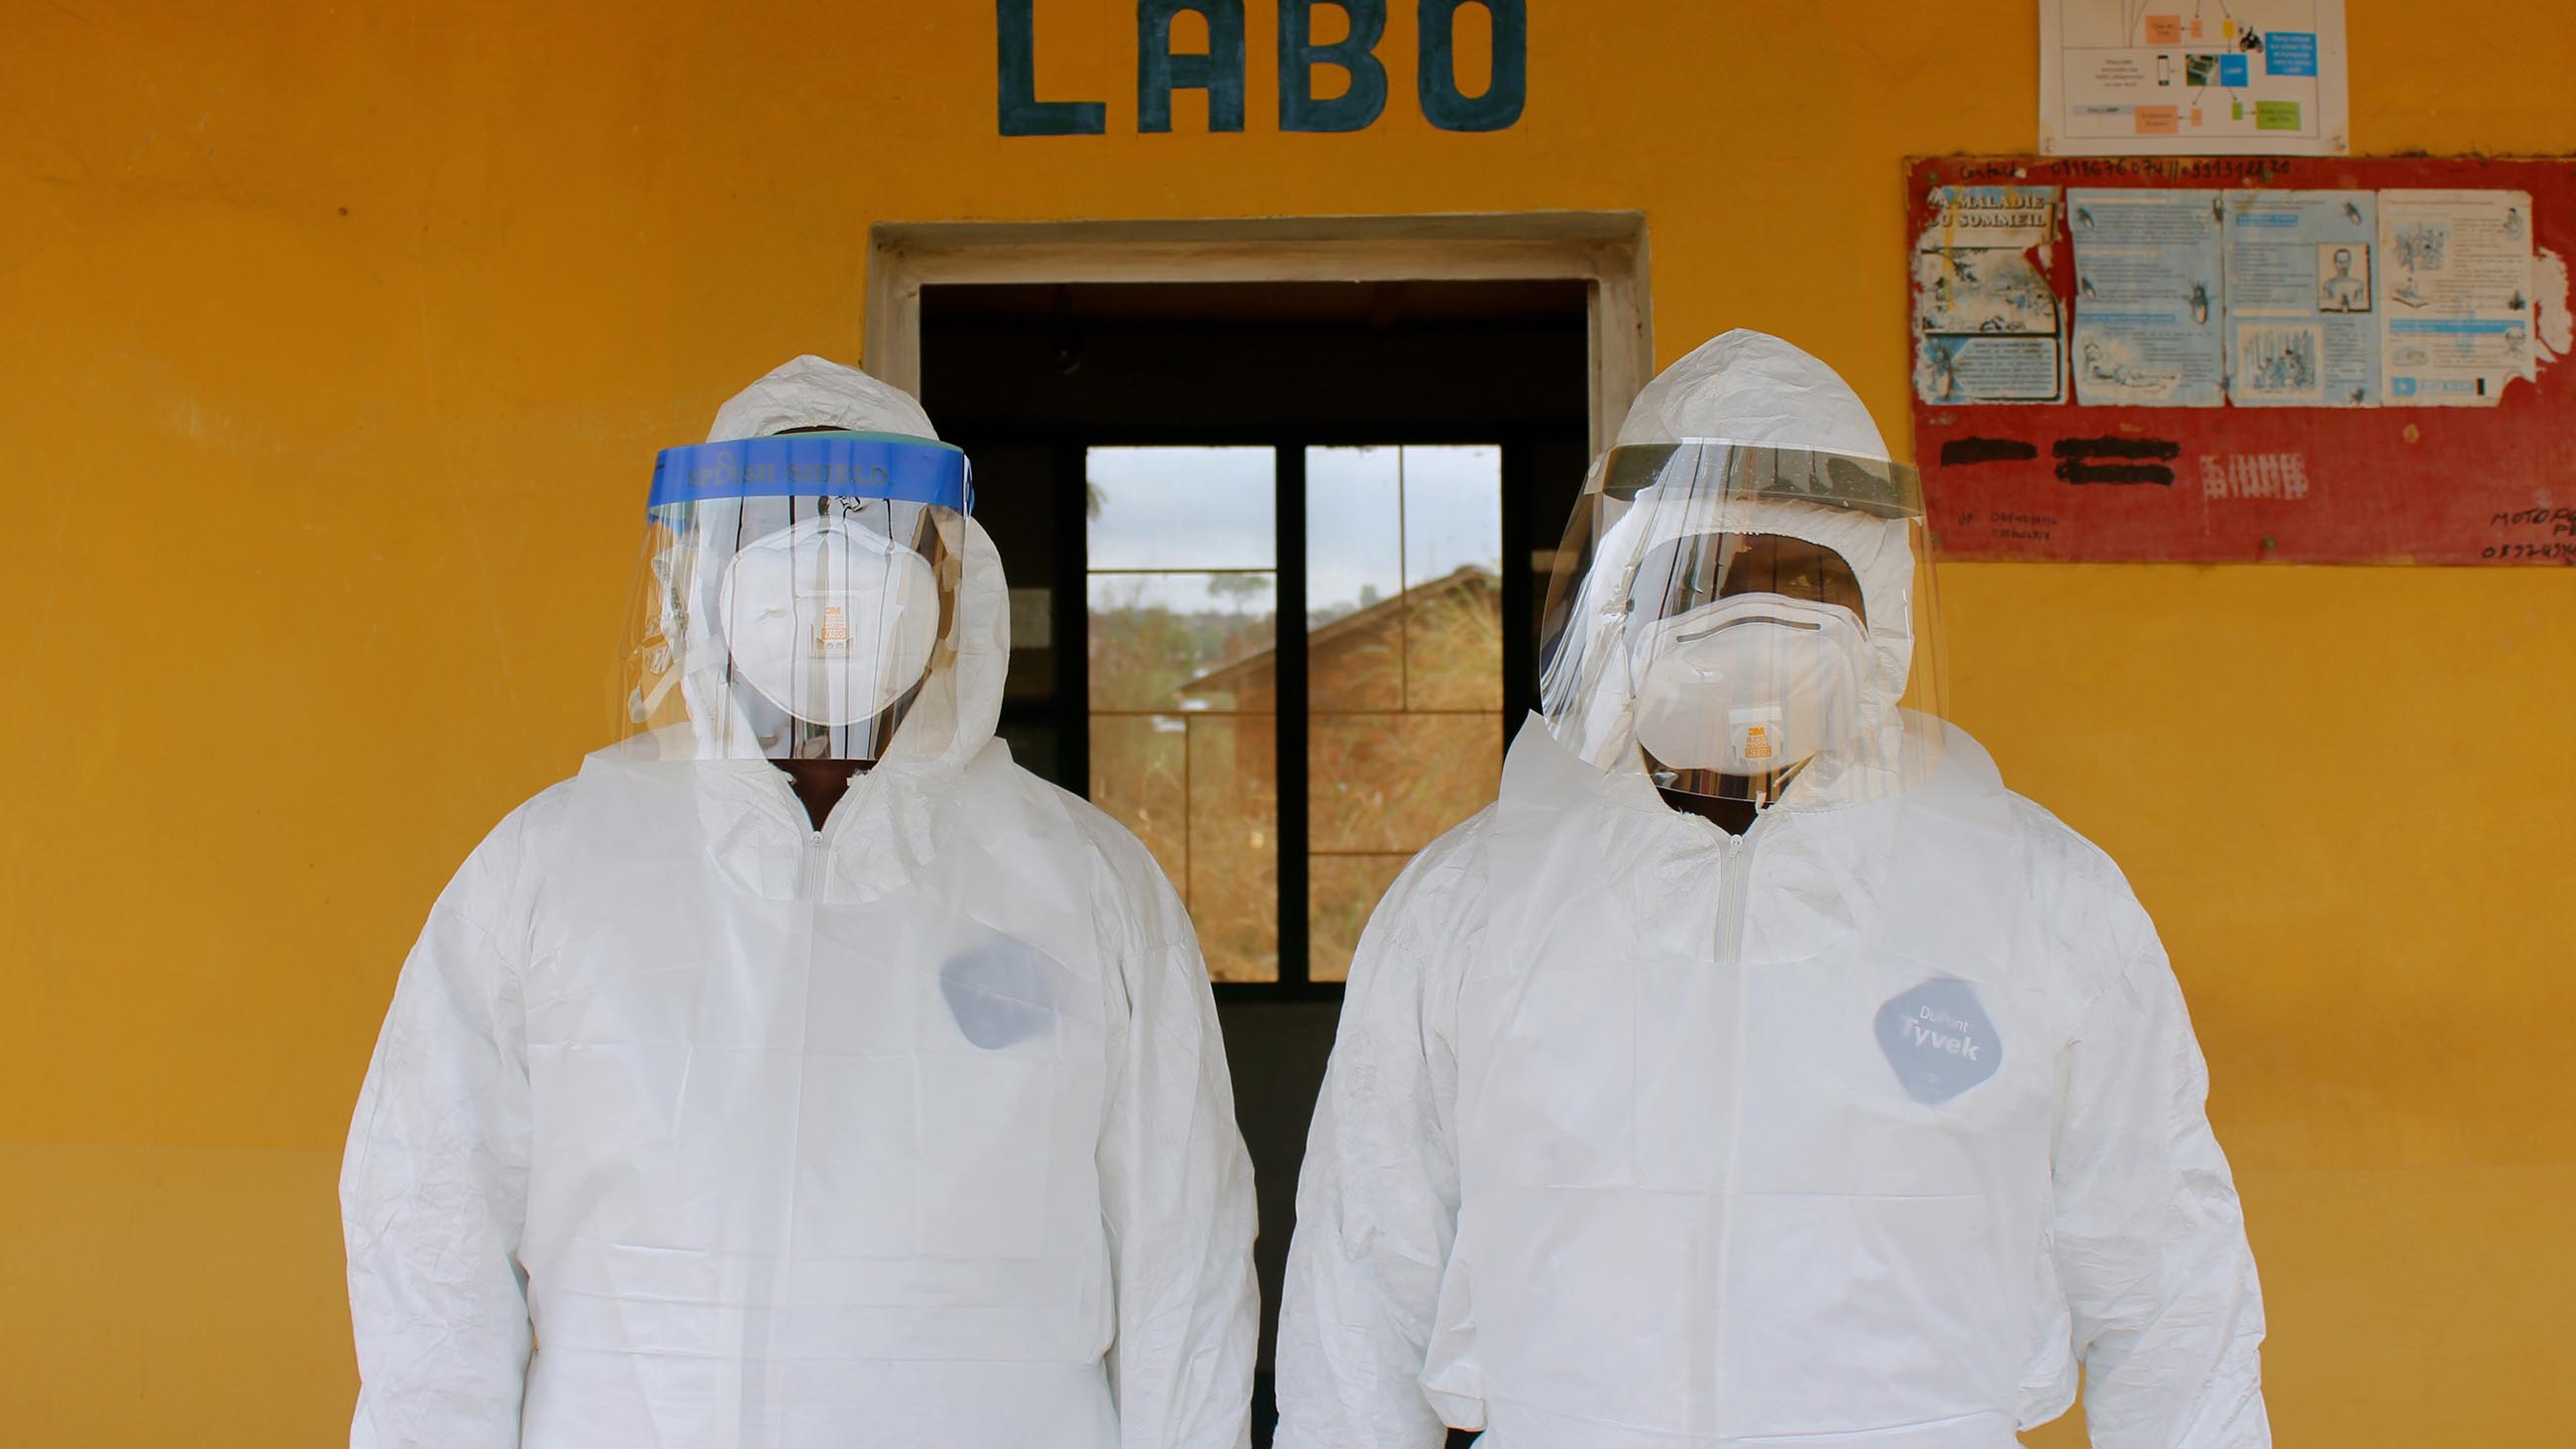 Ipos Lukusa and Guy Midingi are suited up and ready to start sampling bats outside the Kimpese health center.